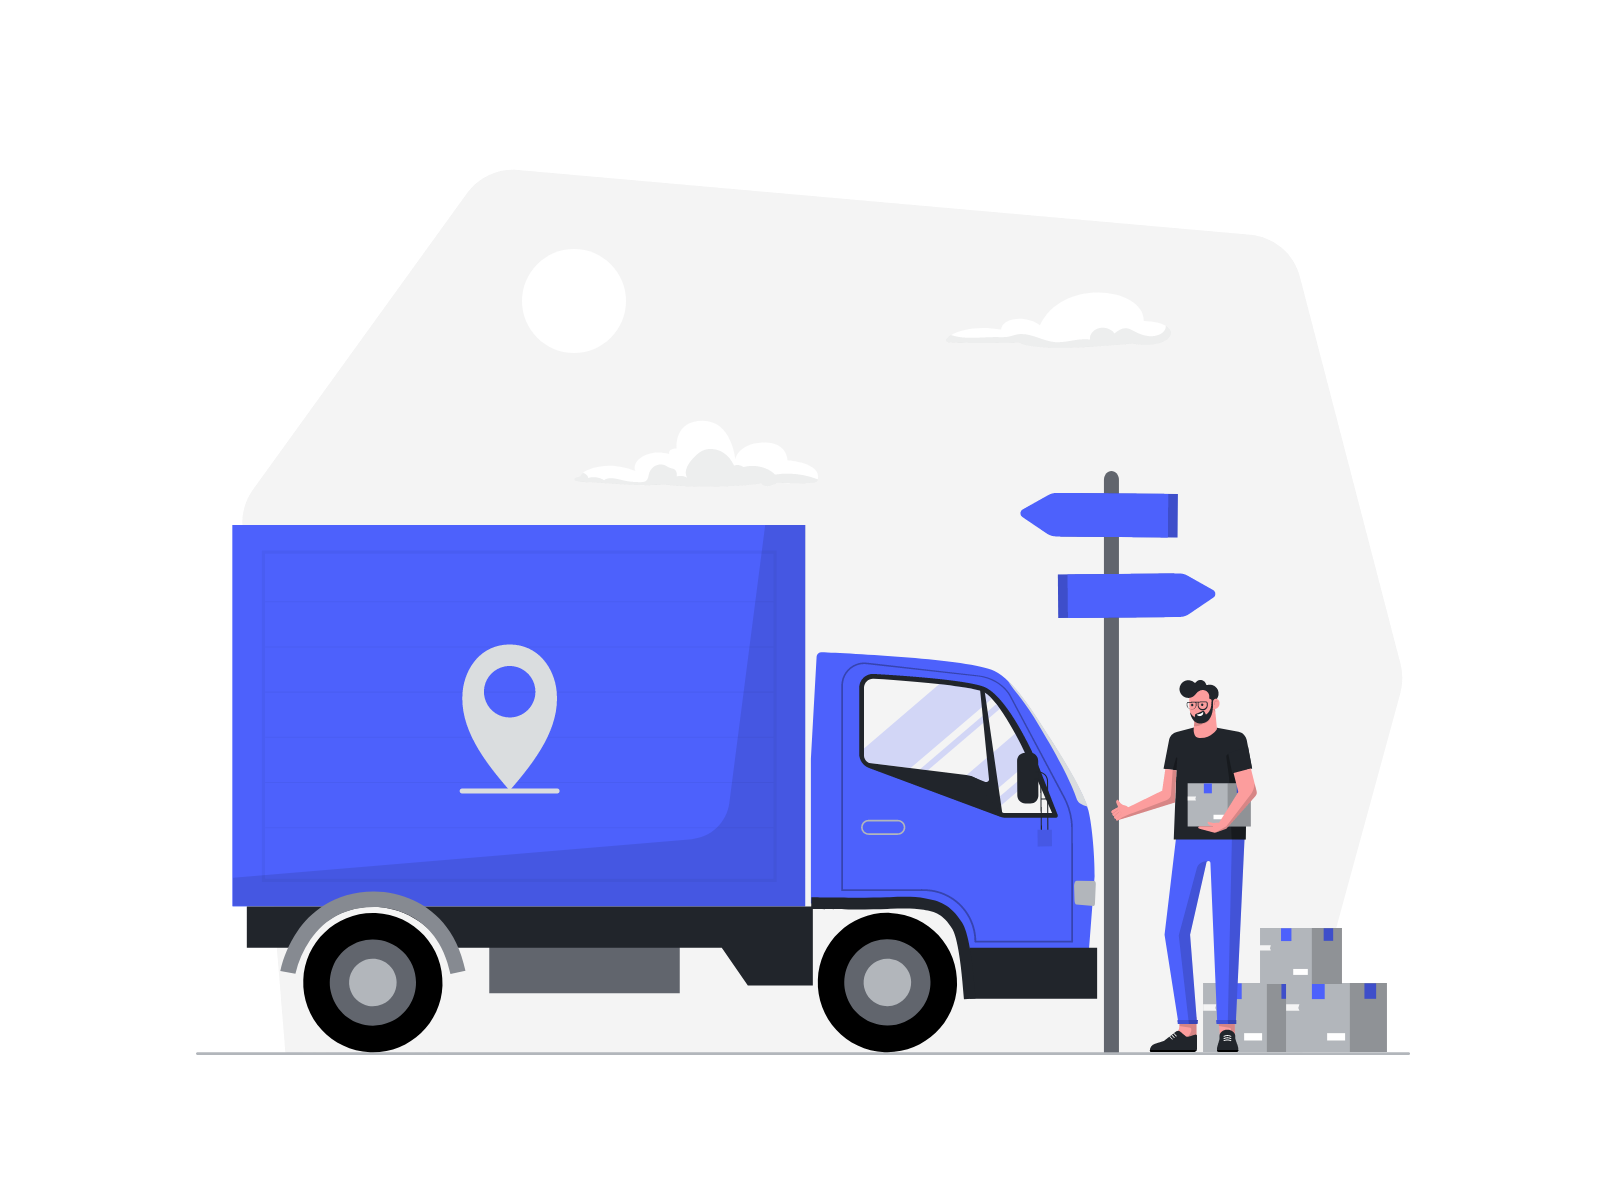 Plan your deliveries with precision